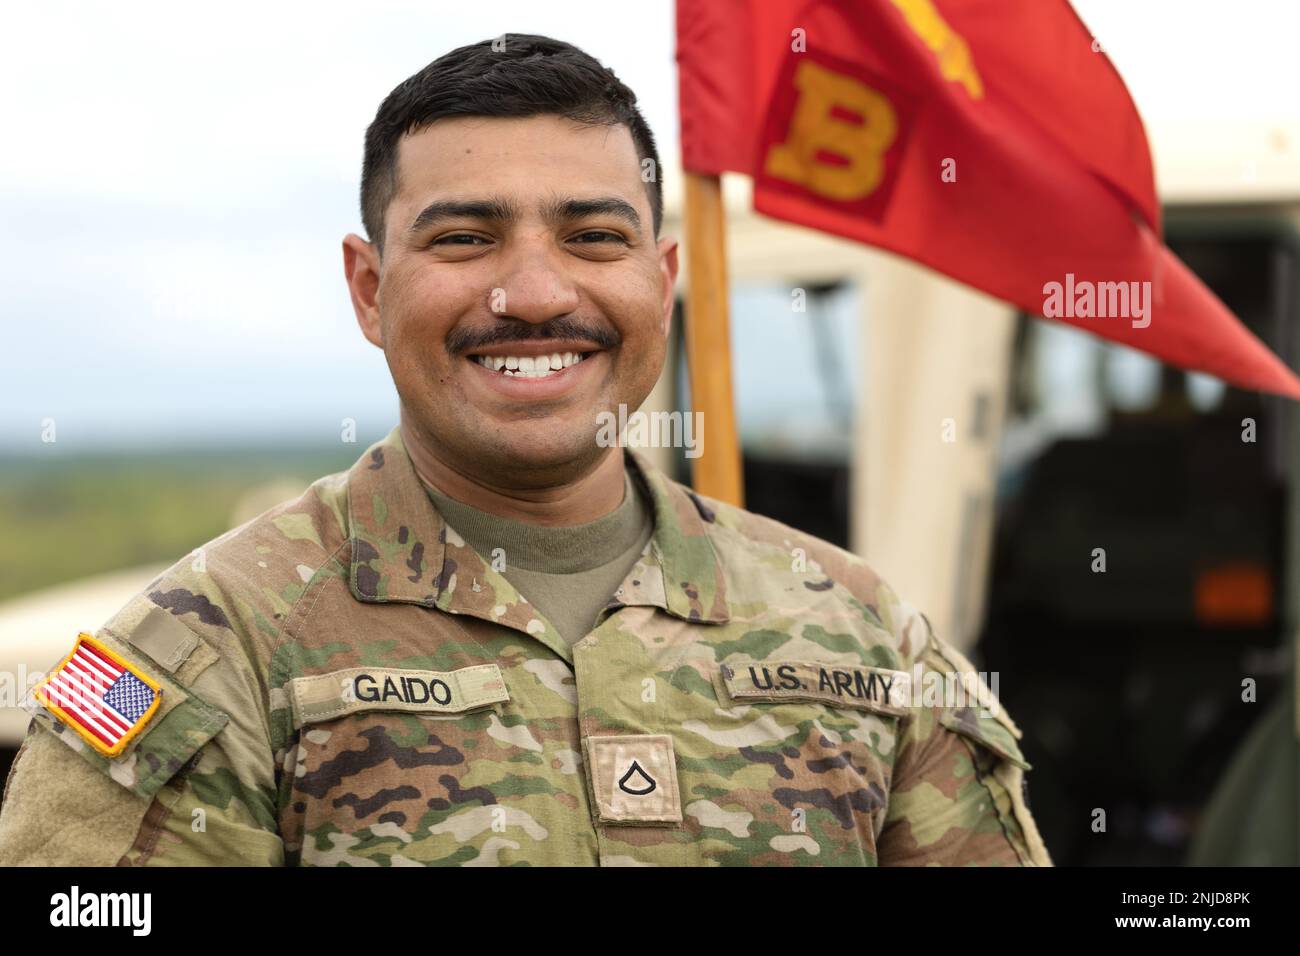 Pfc. Jose Gaido, combat medic with 1st Battalion, 103rd Field Artillery Regiment, stands for a portrait on Aug. 15, 2022, Gaugetown, Canada. Combat medics are an integral part of a field training exercise. Stock Photo